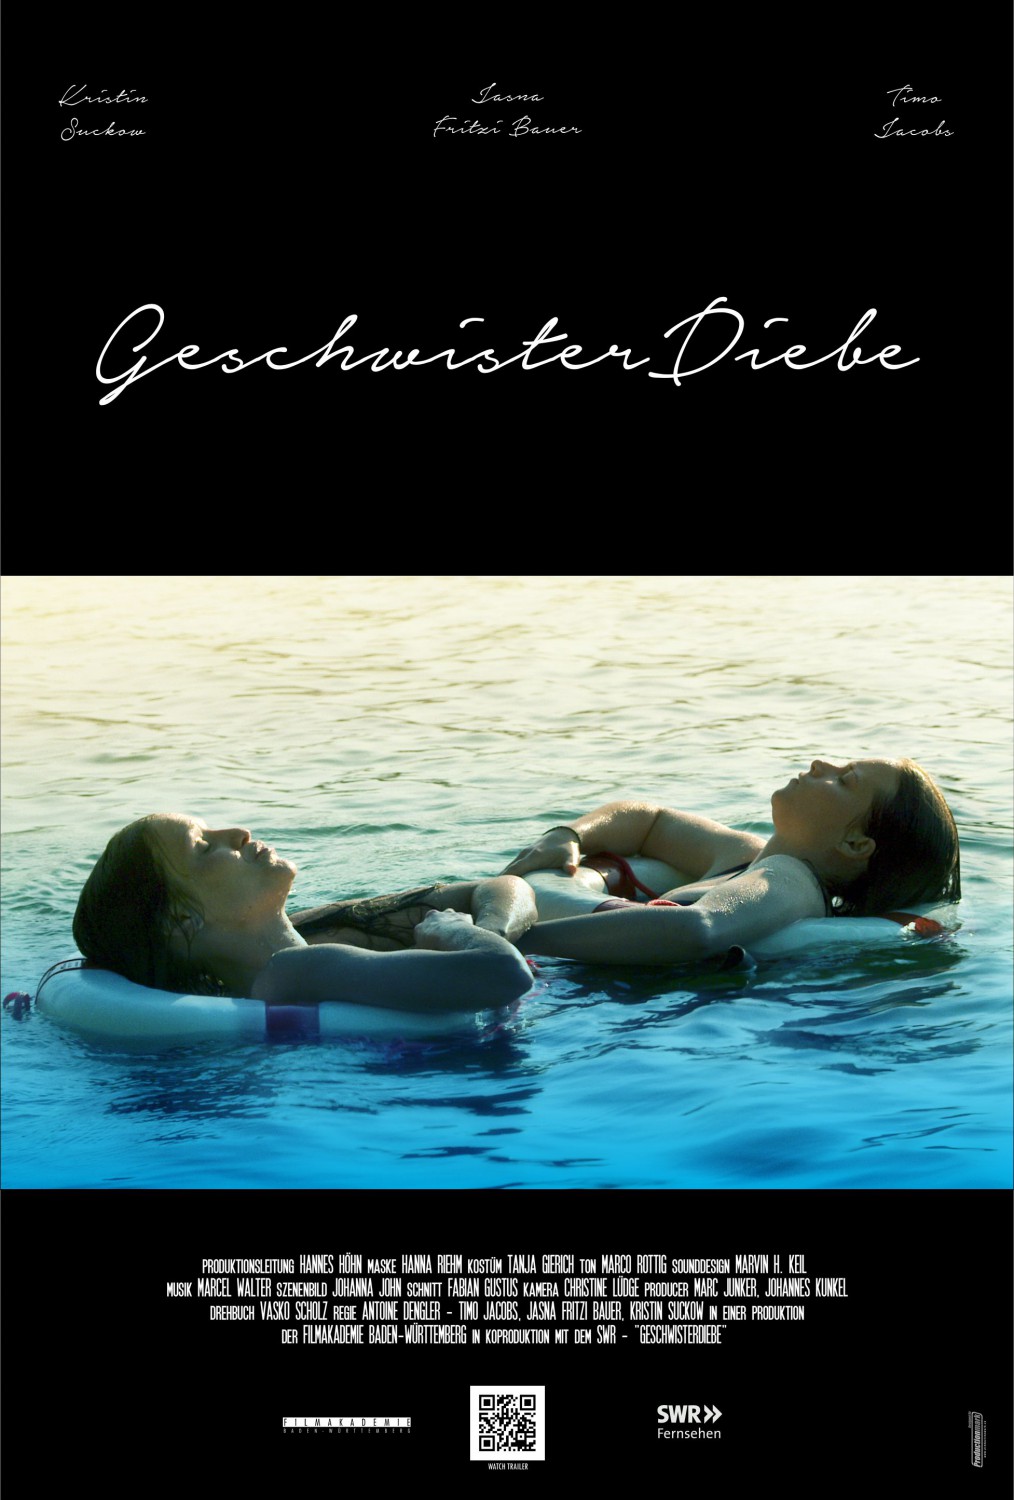 Extra Large Movie Poster Image for GeschwisterDiebe